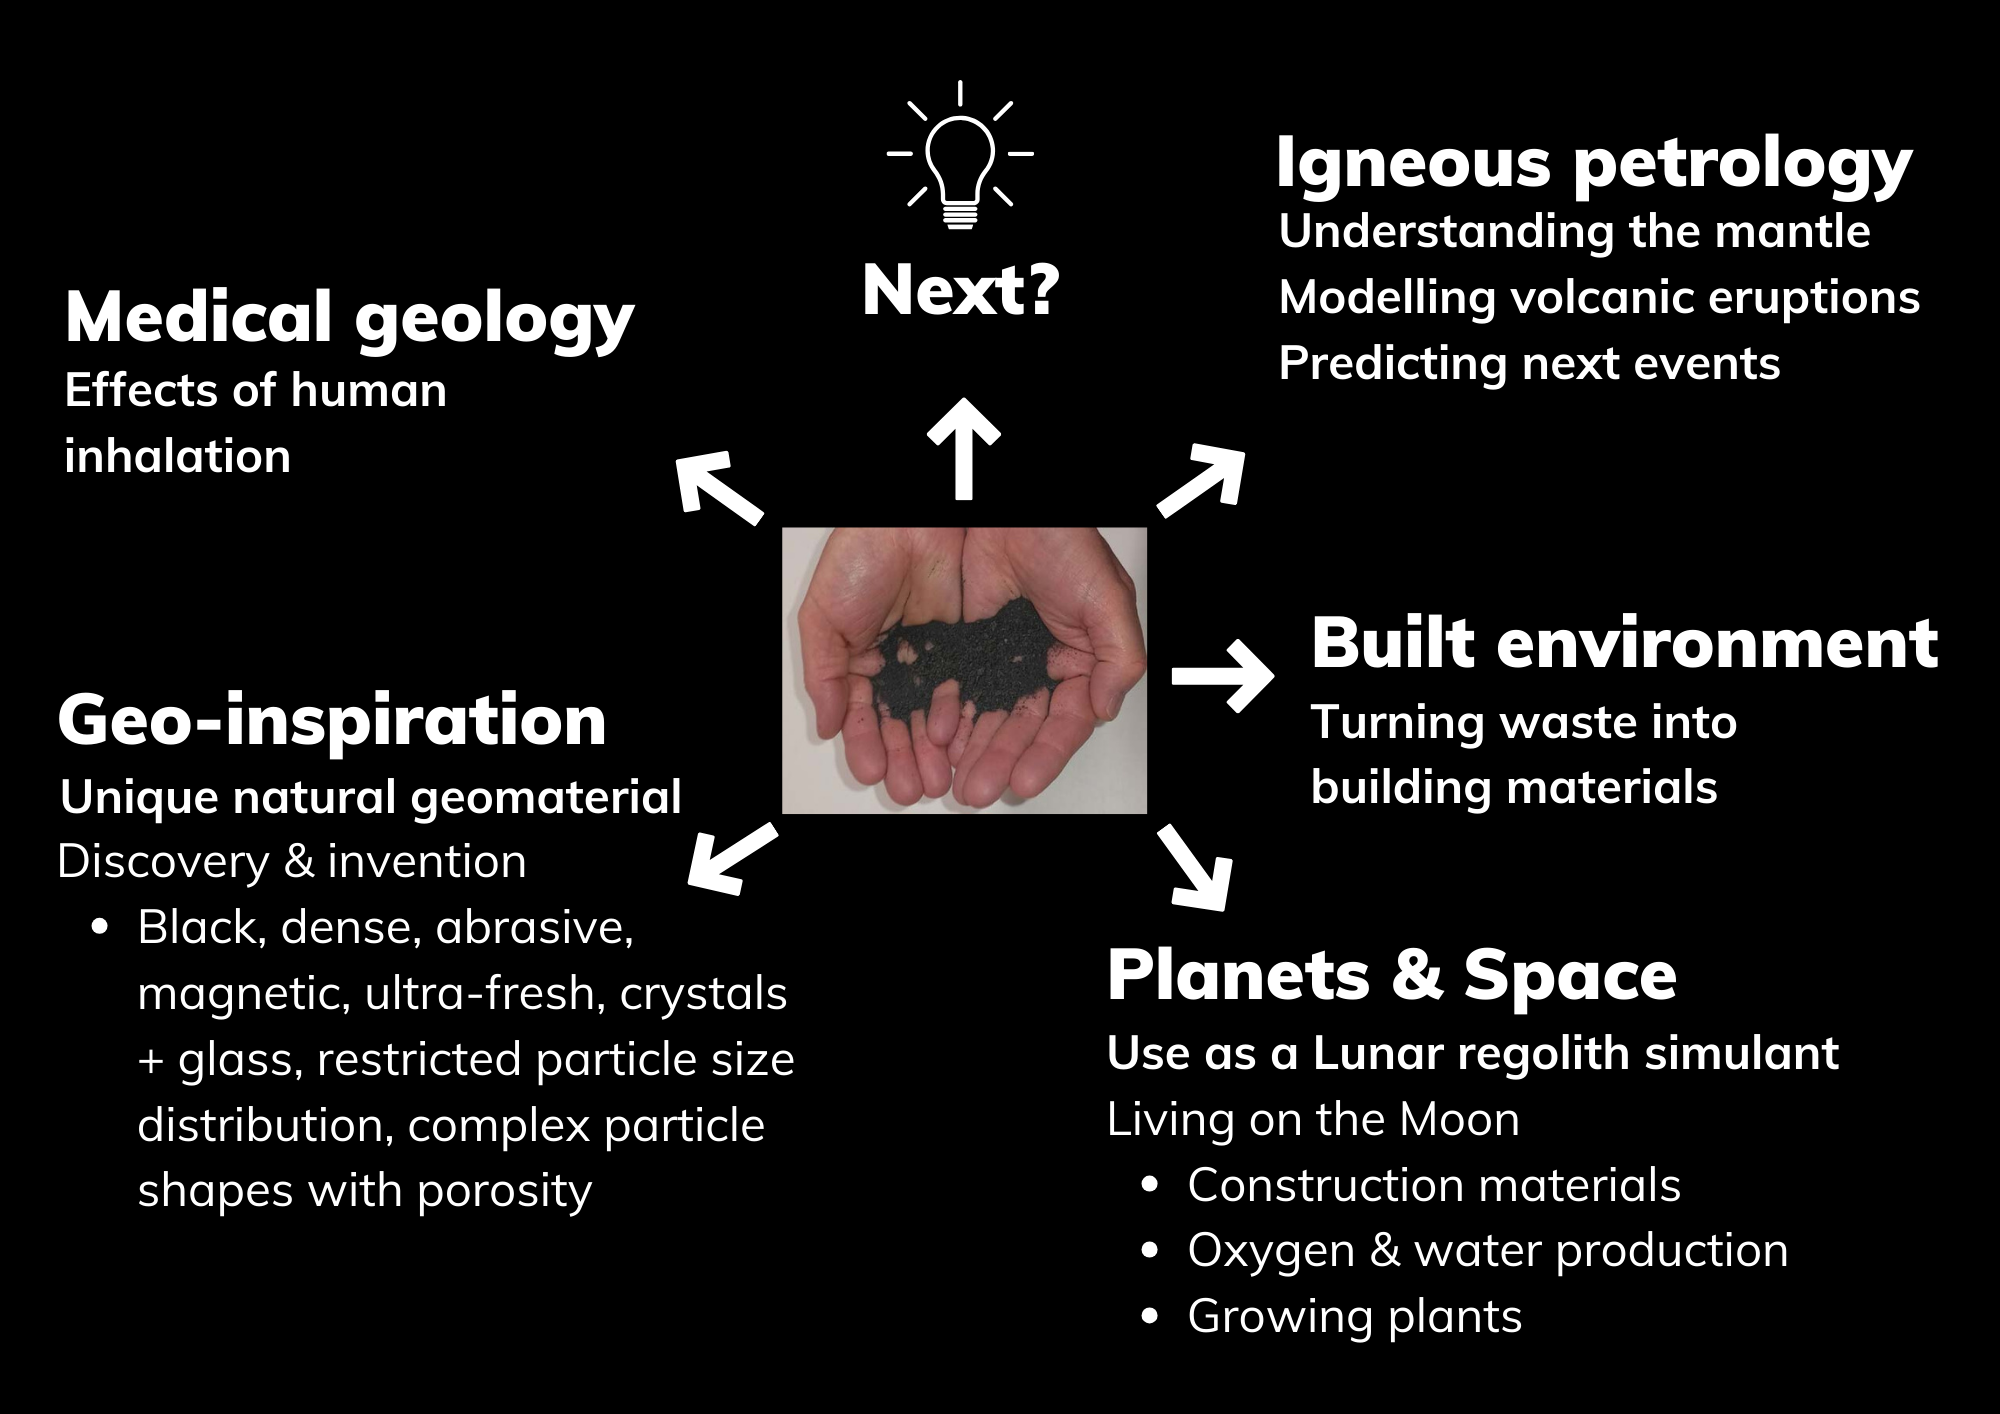 Summary of possible uses of the volcanic ash from La Palma, which shows it to be a remarkable and potentially useful material in a sustainable modern world.